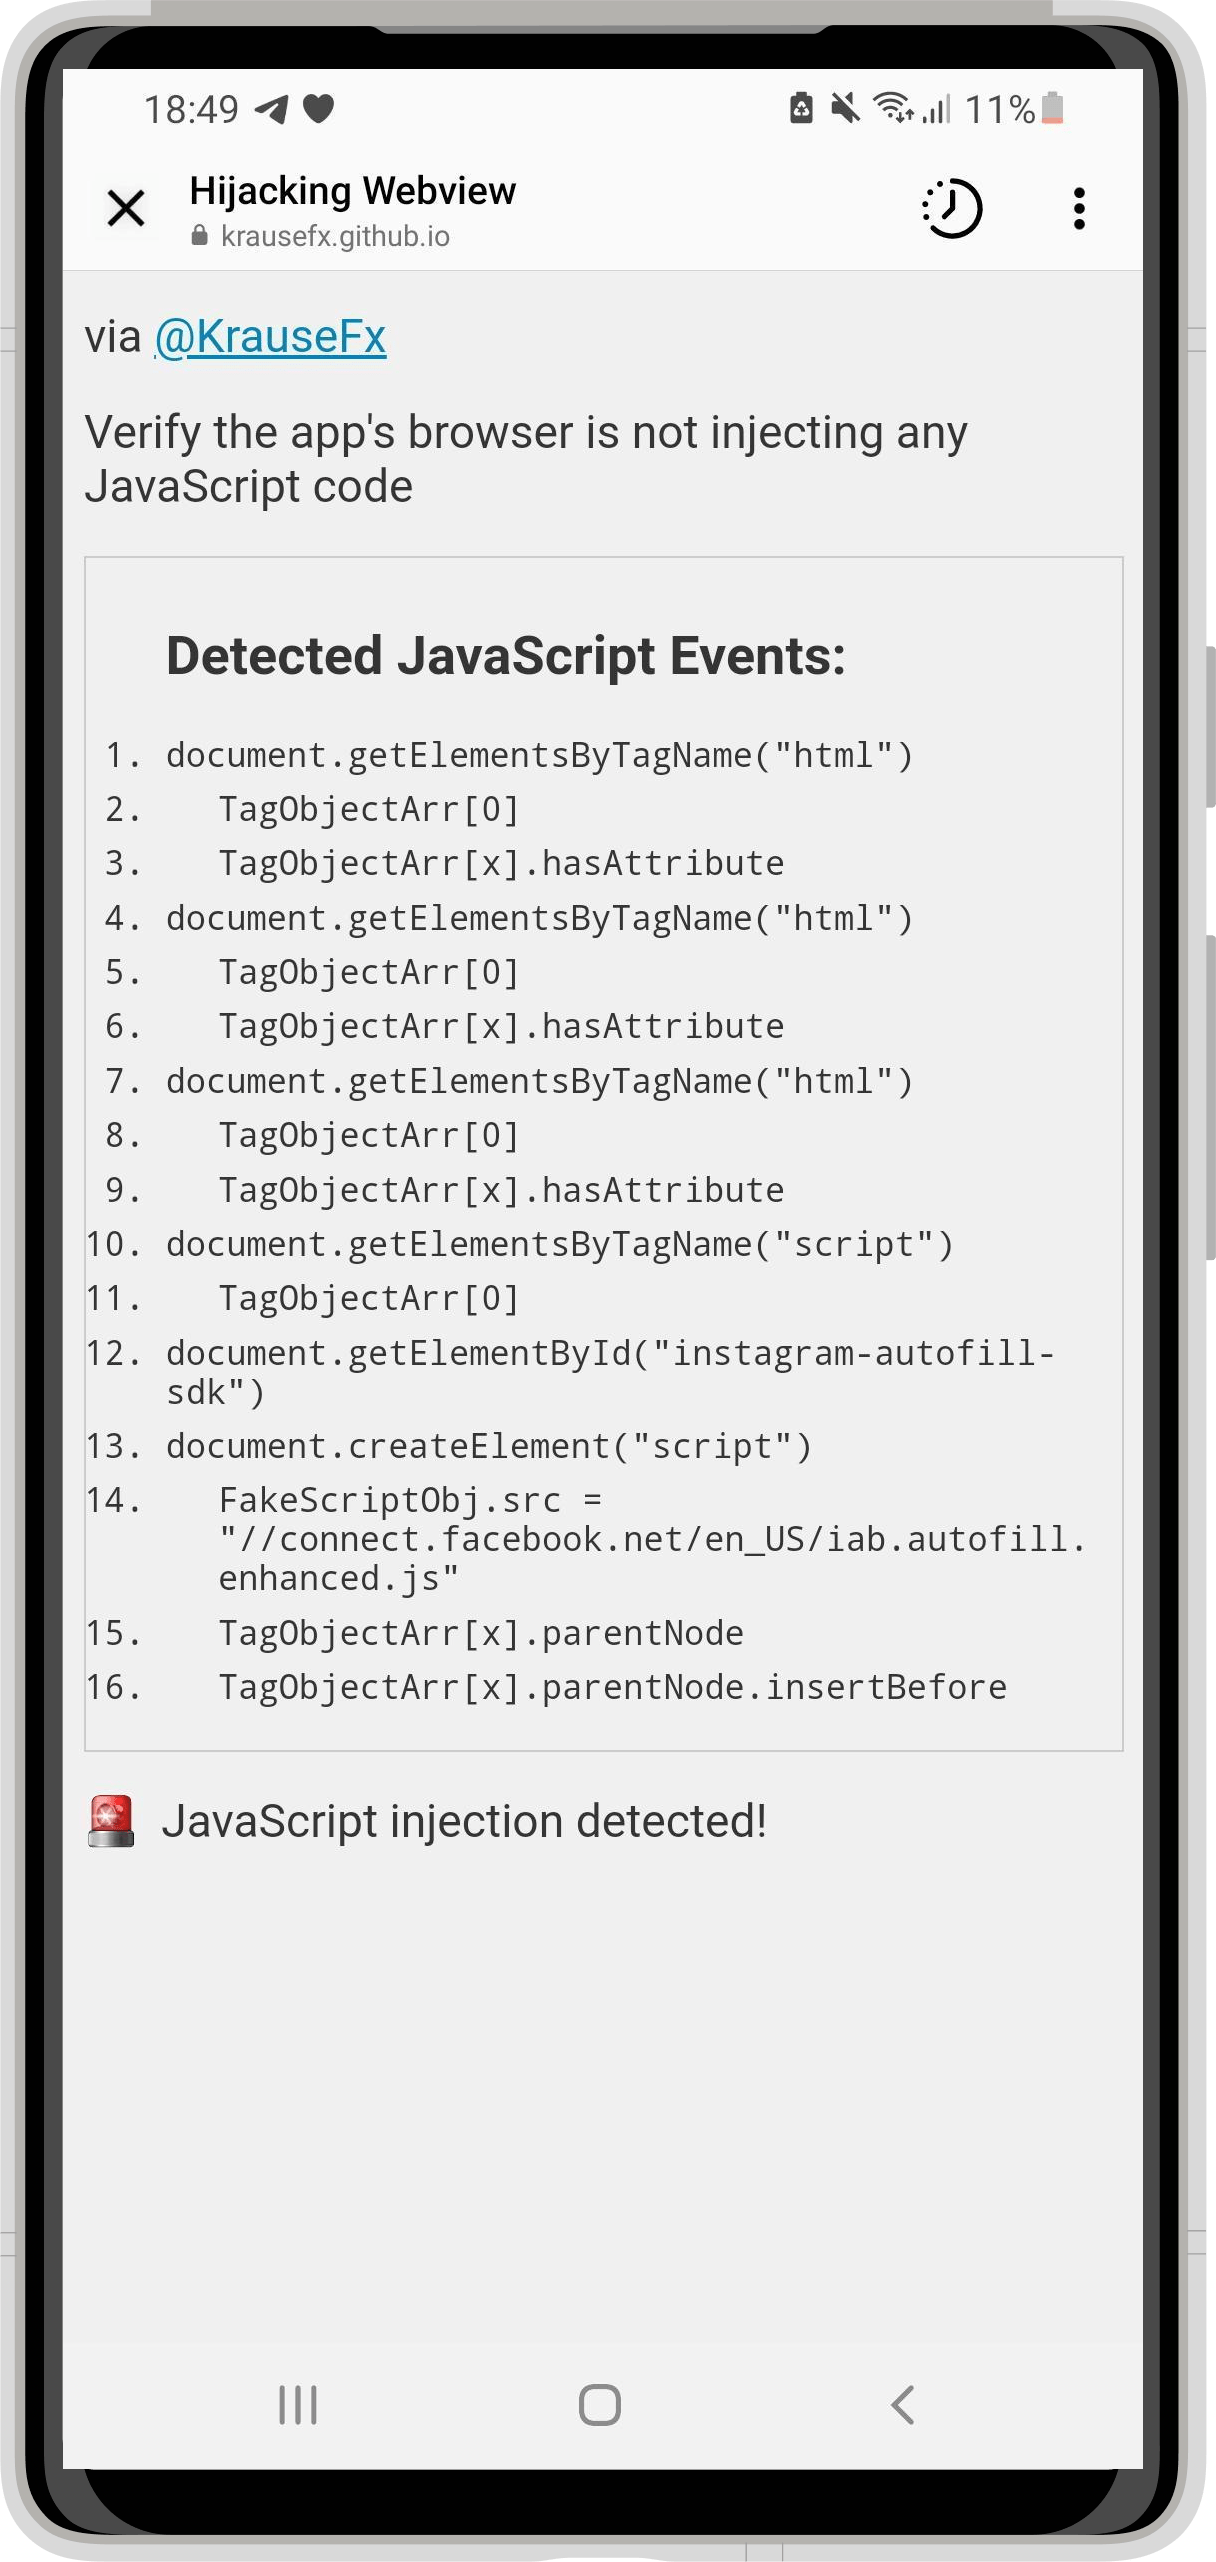 The same code as the previous photo, however this time inside Android Instagram